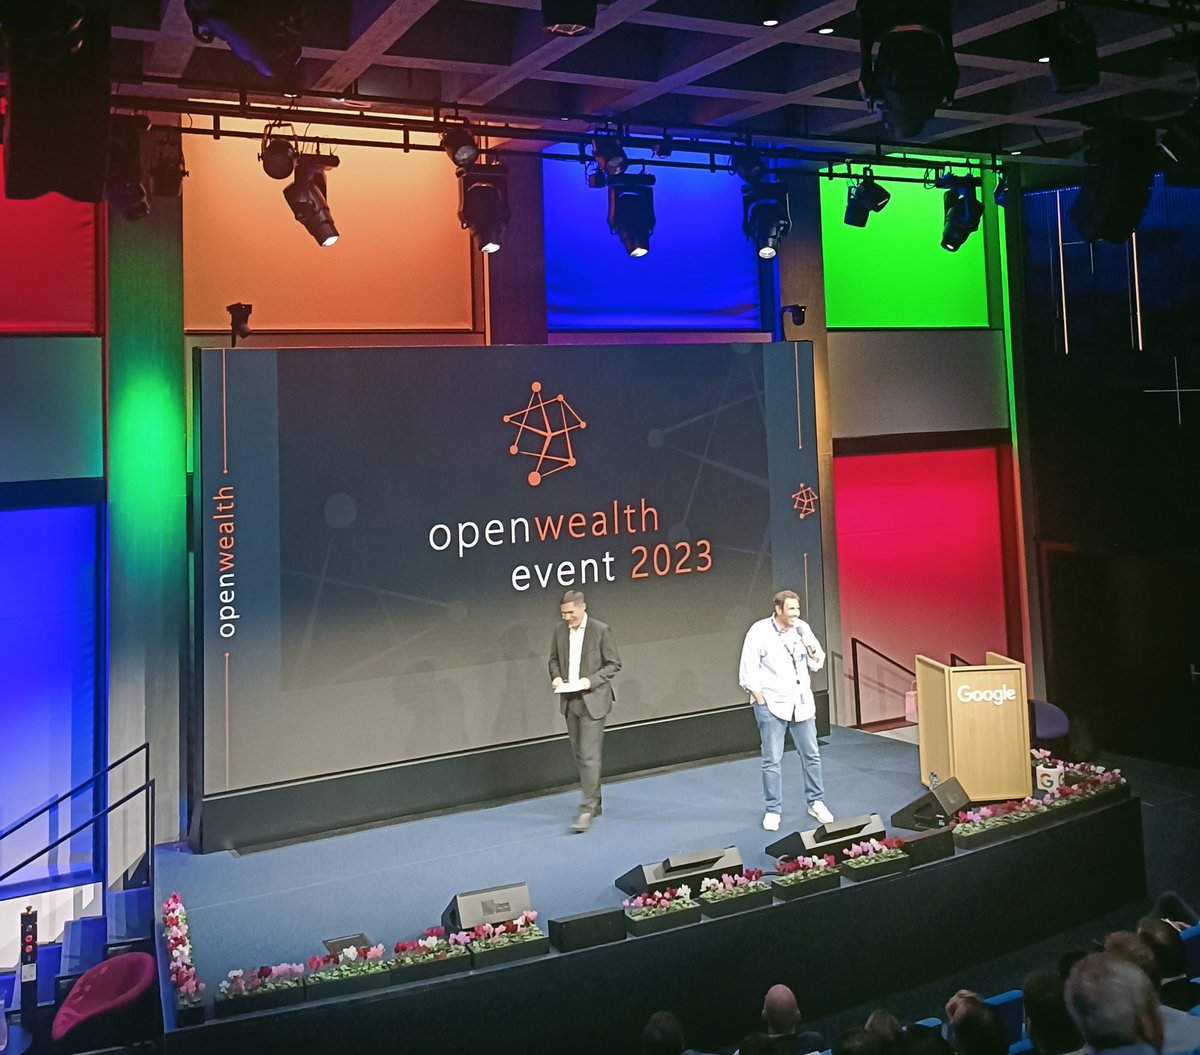 Always amazed to see the @OpenWealthAPI community coming together at @roitavor's HQ at google Zürich talking about the latest and greatest of driving #openwealth standards out of Switzerland into global business! Thanks for the invitation @salioth and team! #ecosystem #community